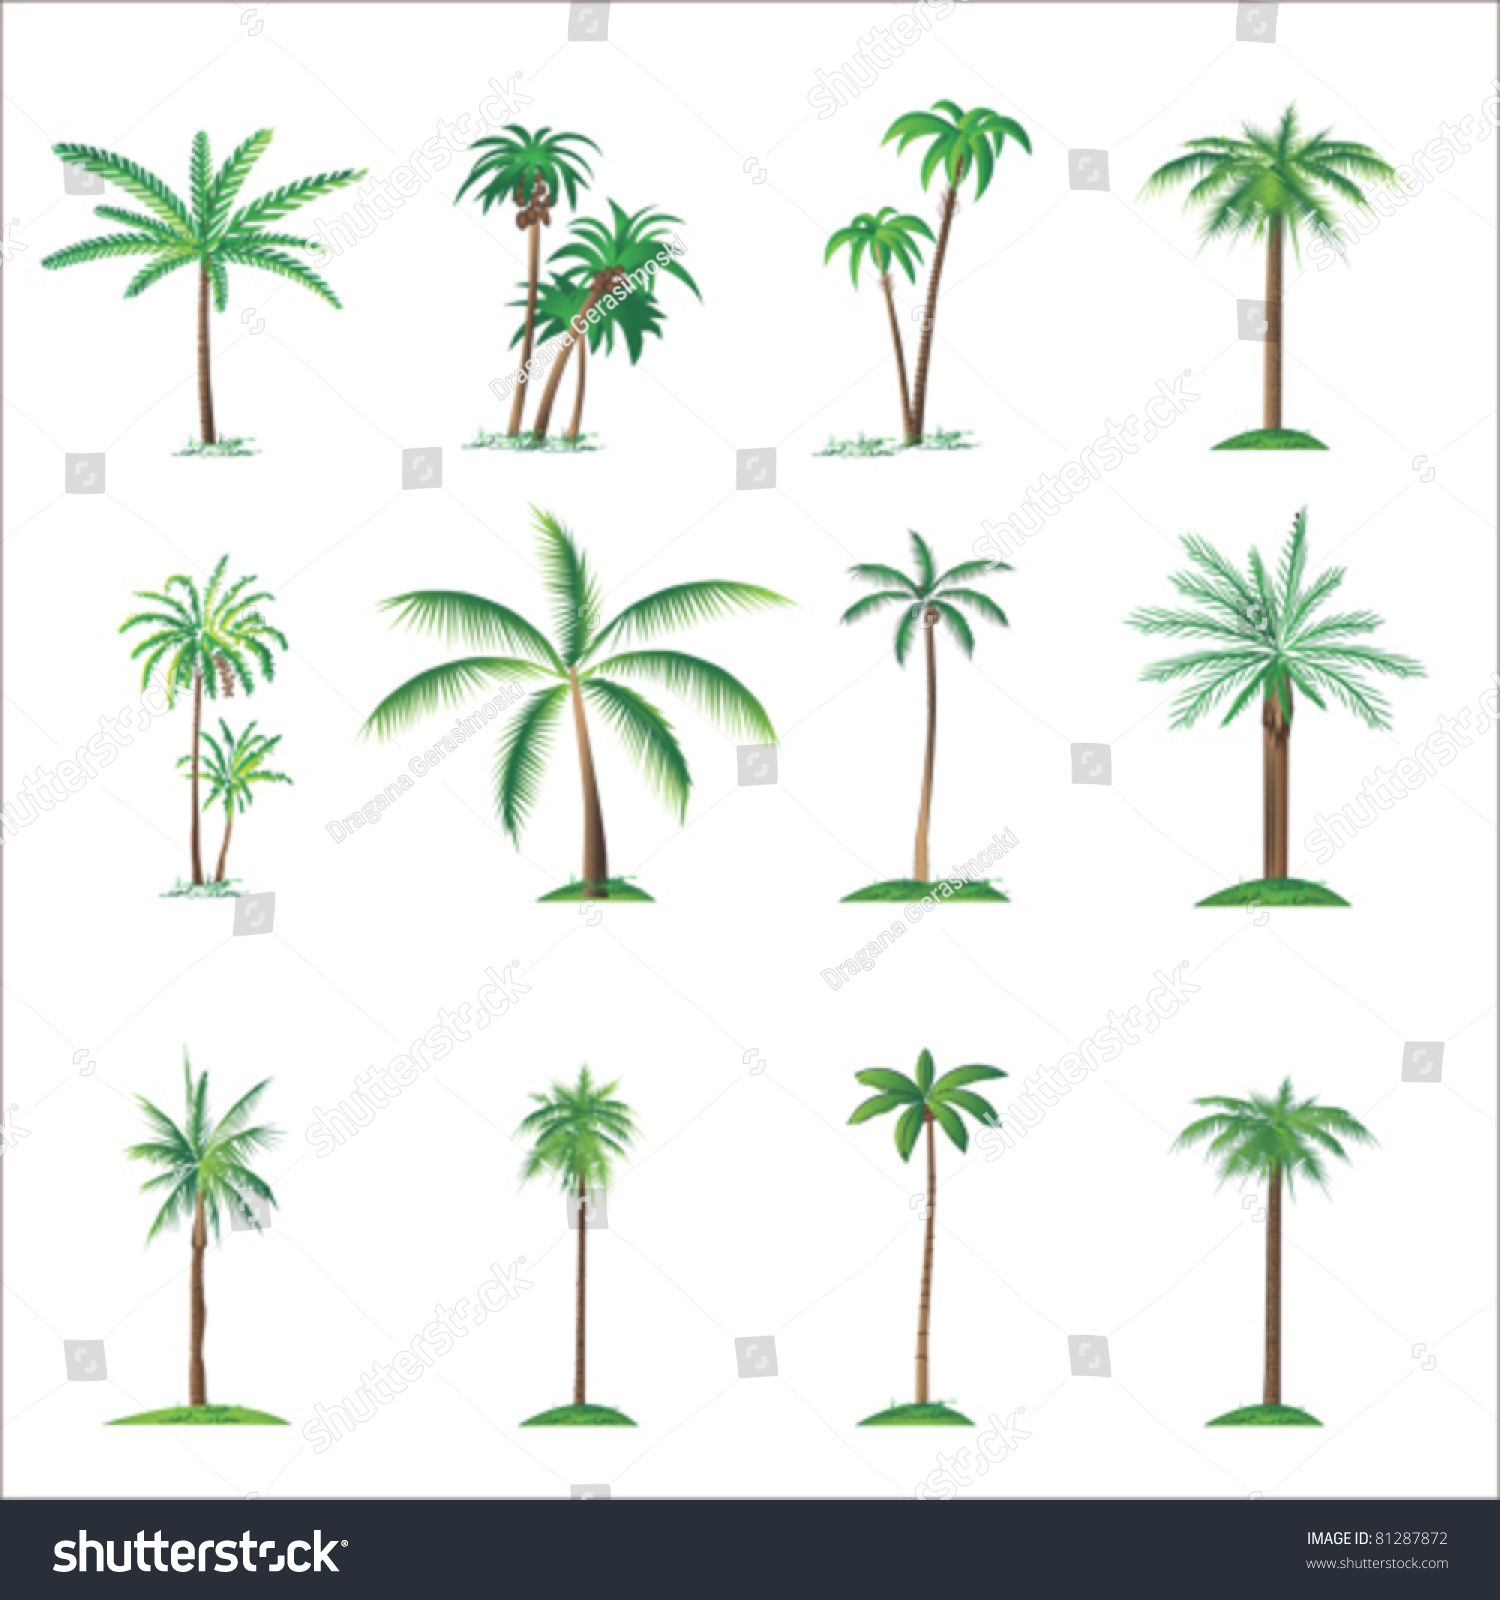 Palm Tree Collection, Isolated On White, Vector - 81287872 : Shutterstock